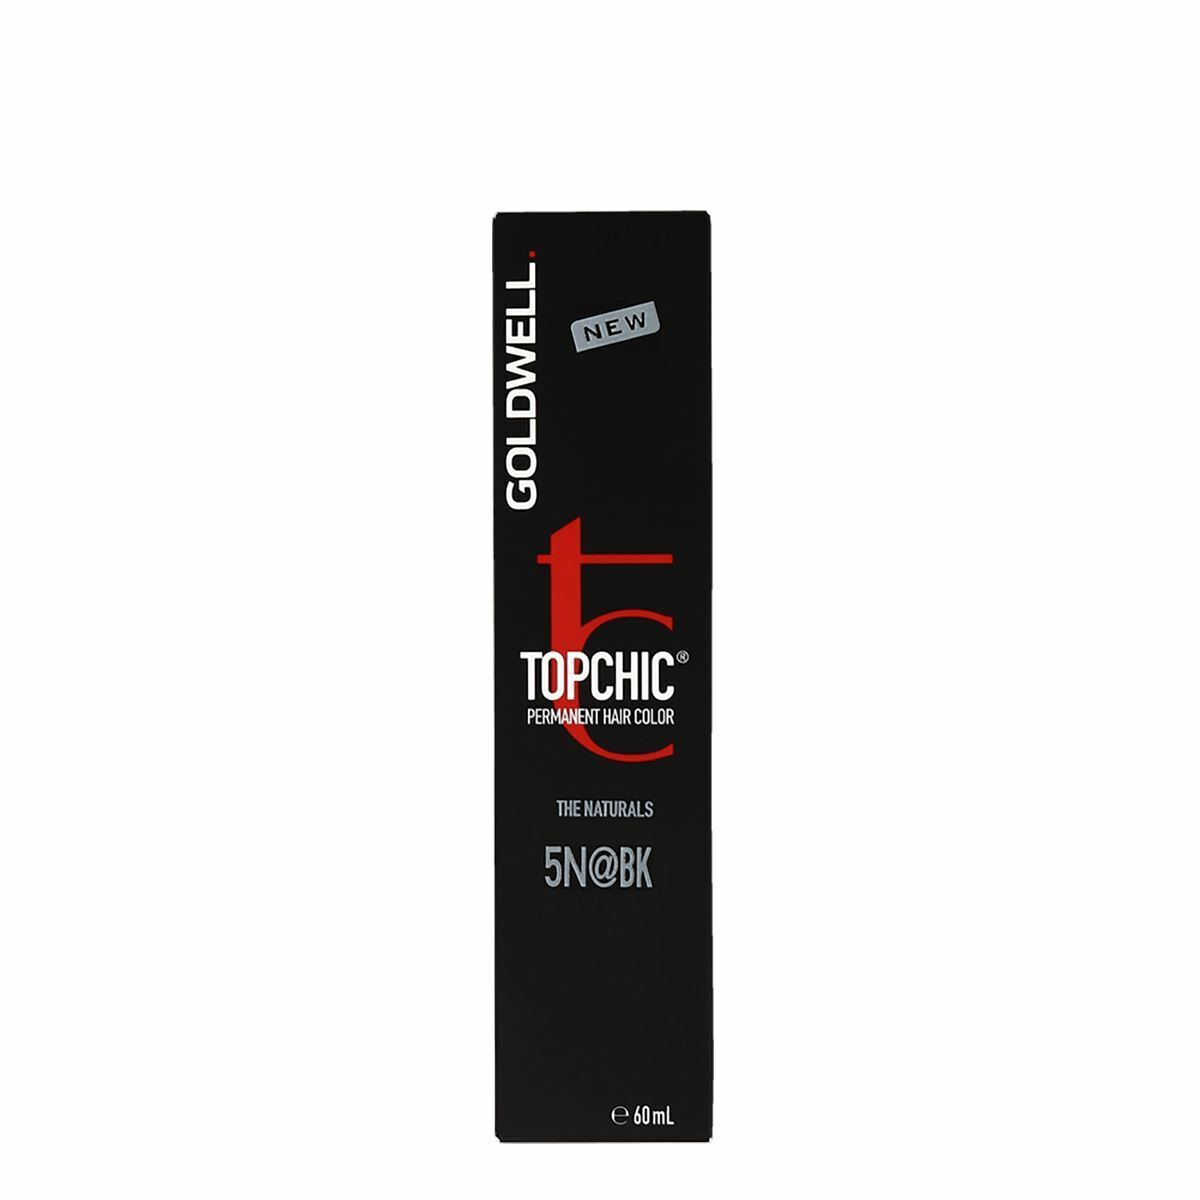 Goldwell Topchic The Naturals Light Brown 5N@BK Permanent Hair Color 60ml